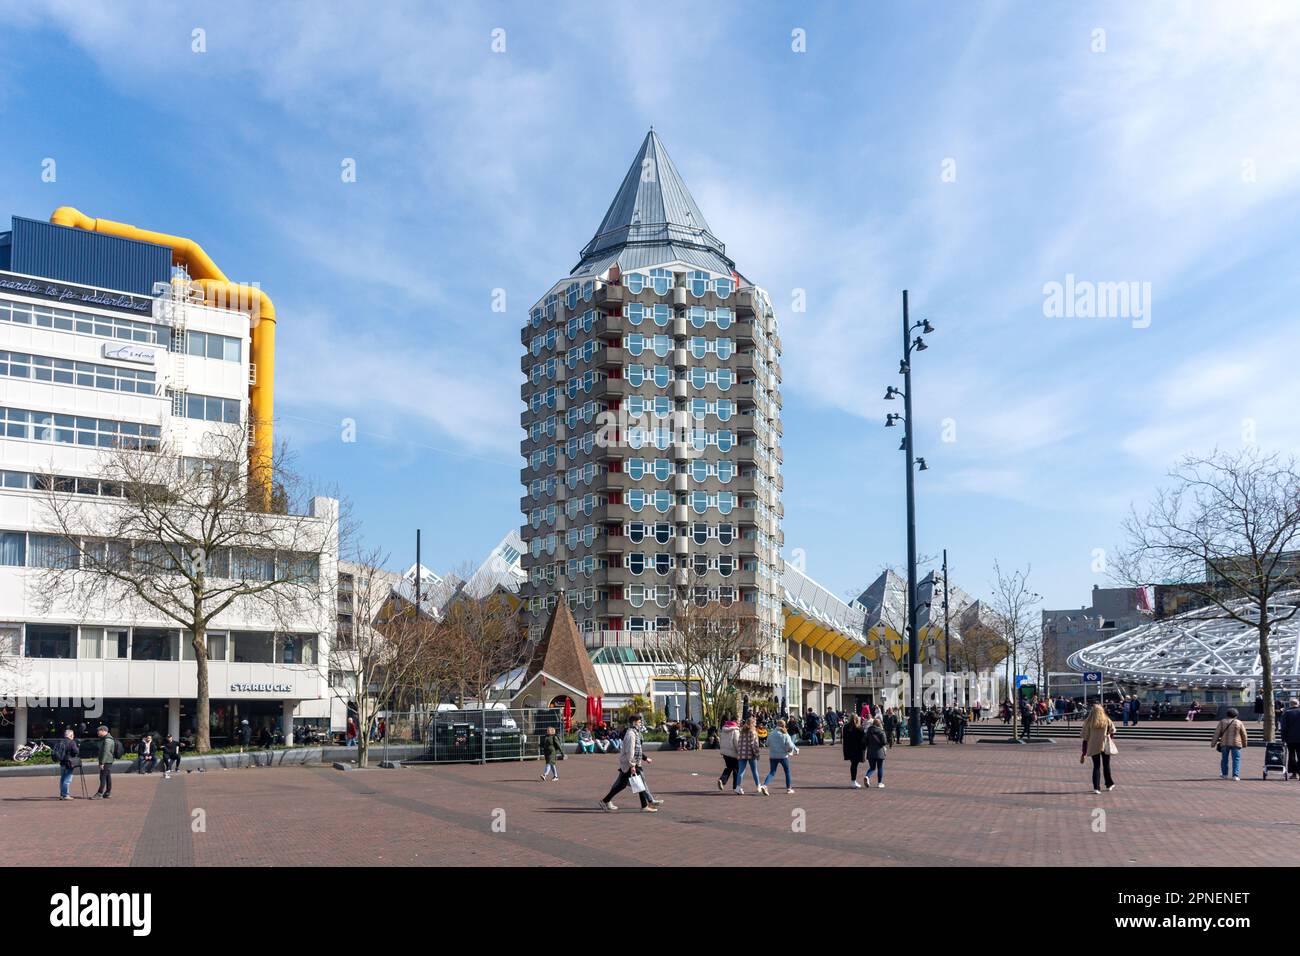 Apartment building, Hoogstraat, Stadsdriehoek, Rotterdam, South Holland Province, Kingdom of the Netherlands Stock Photo